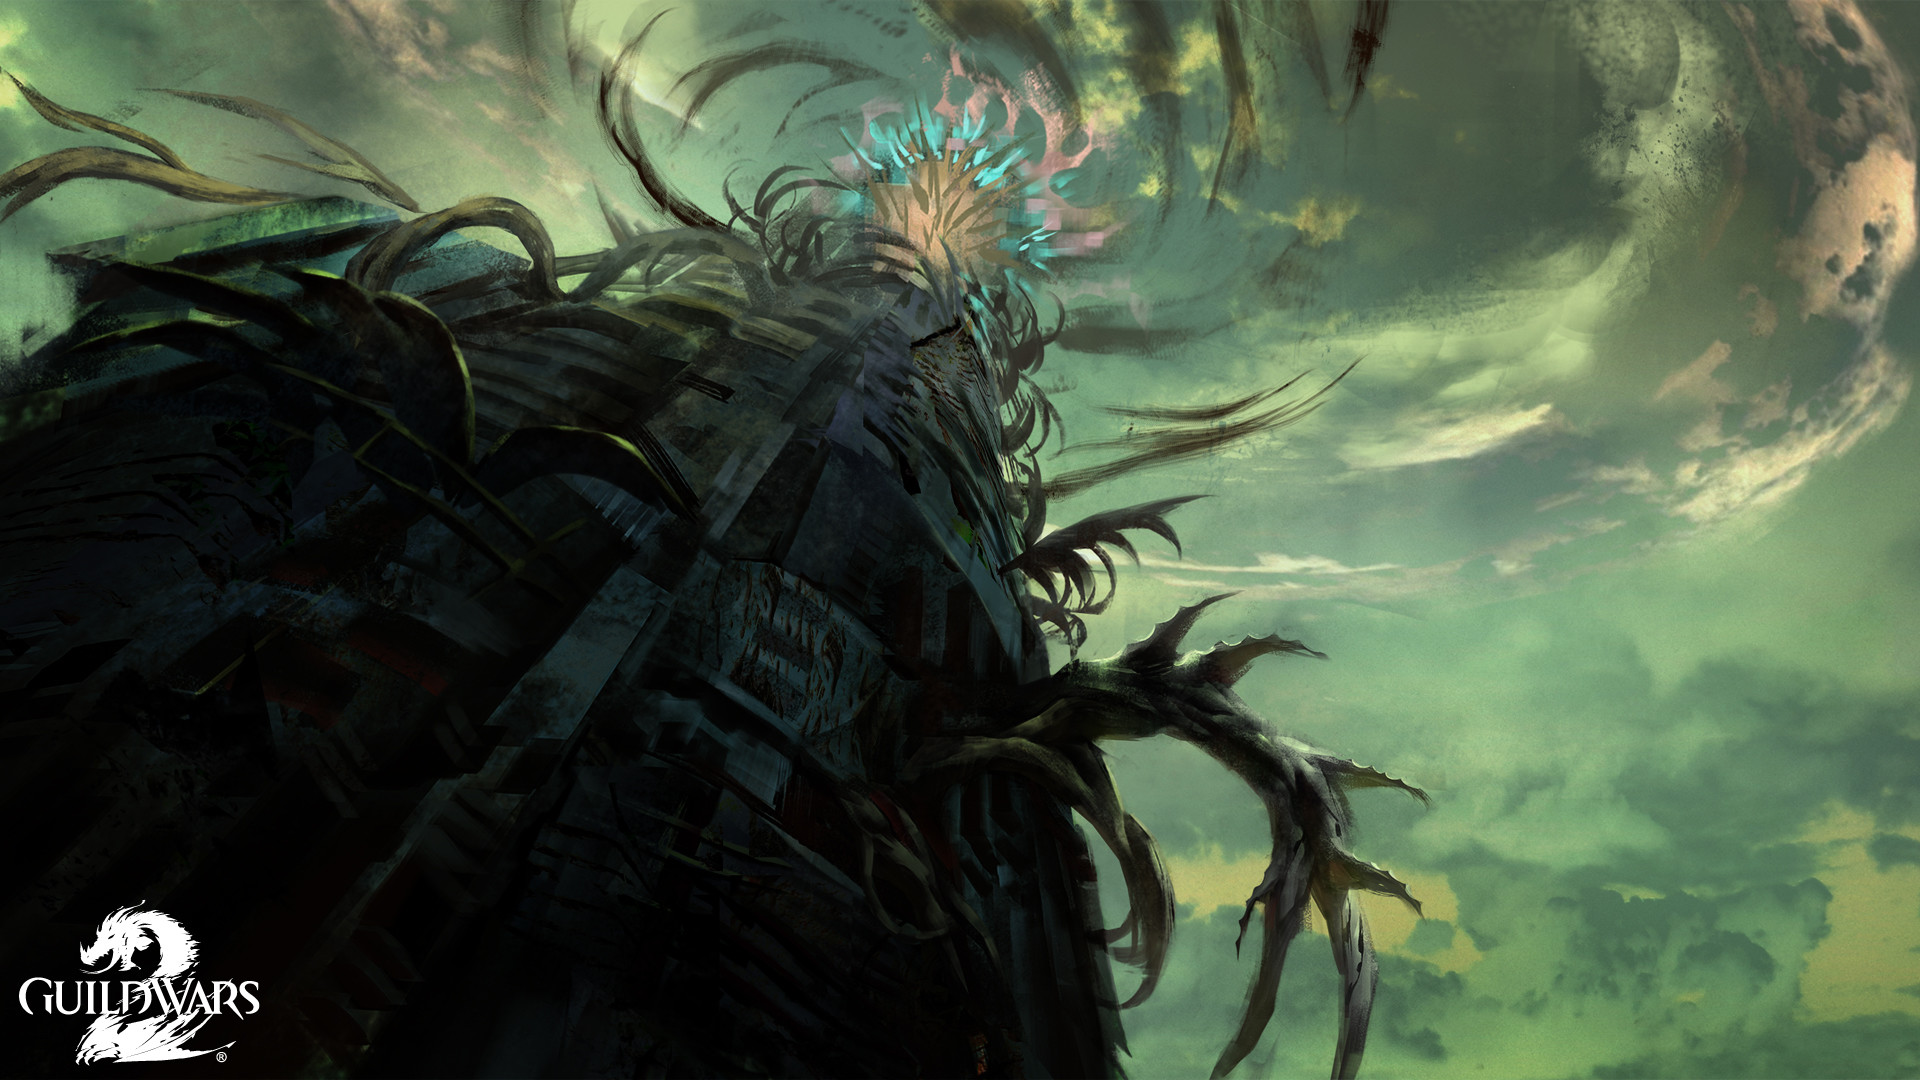 1920x1080 Guild Wars 2 images Tower Of Nightmares HD wallpaper and background photos